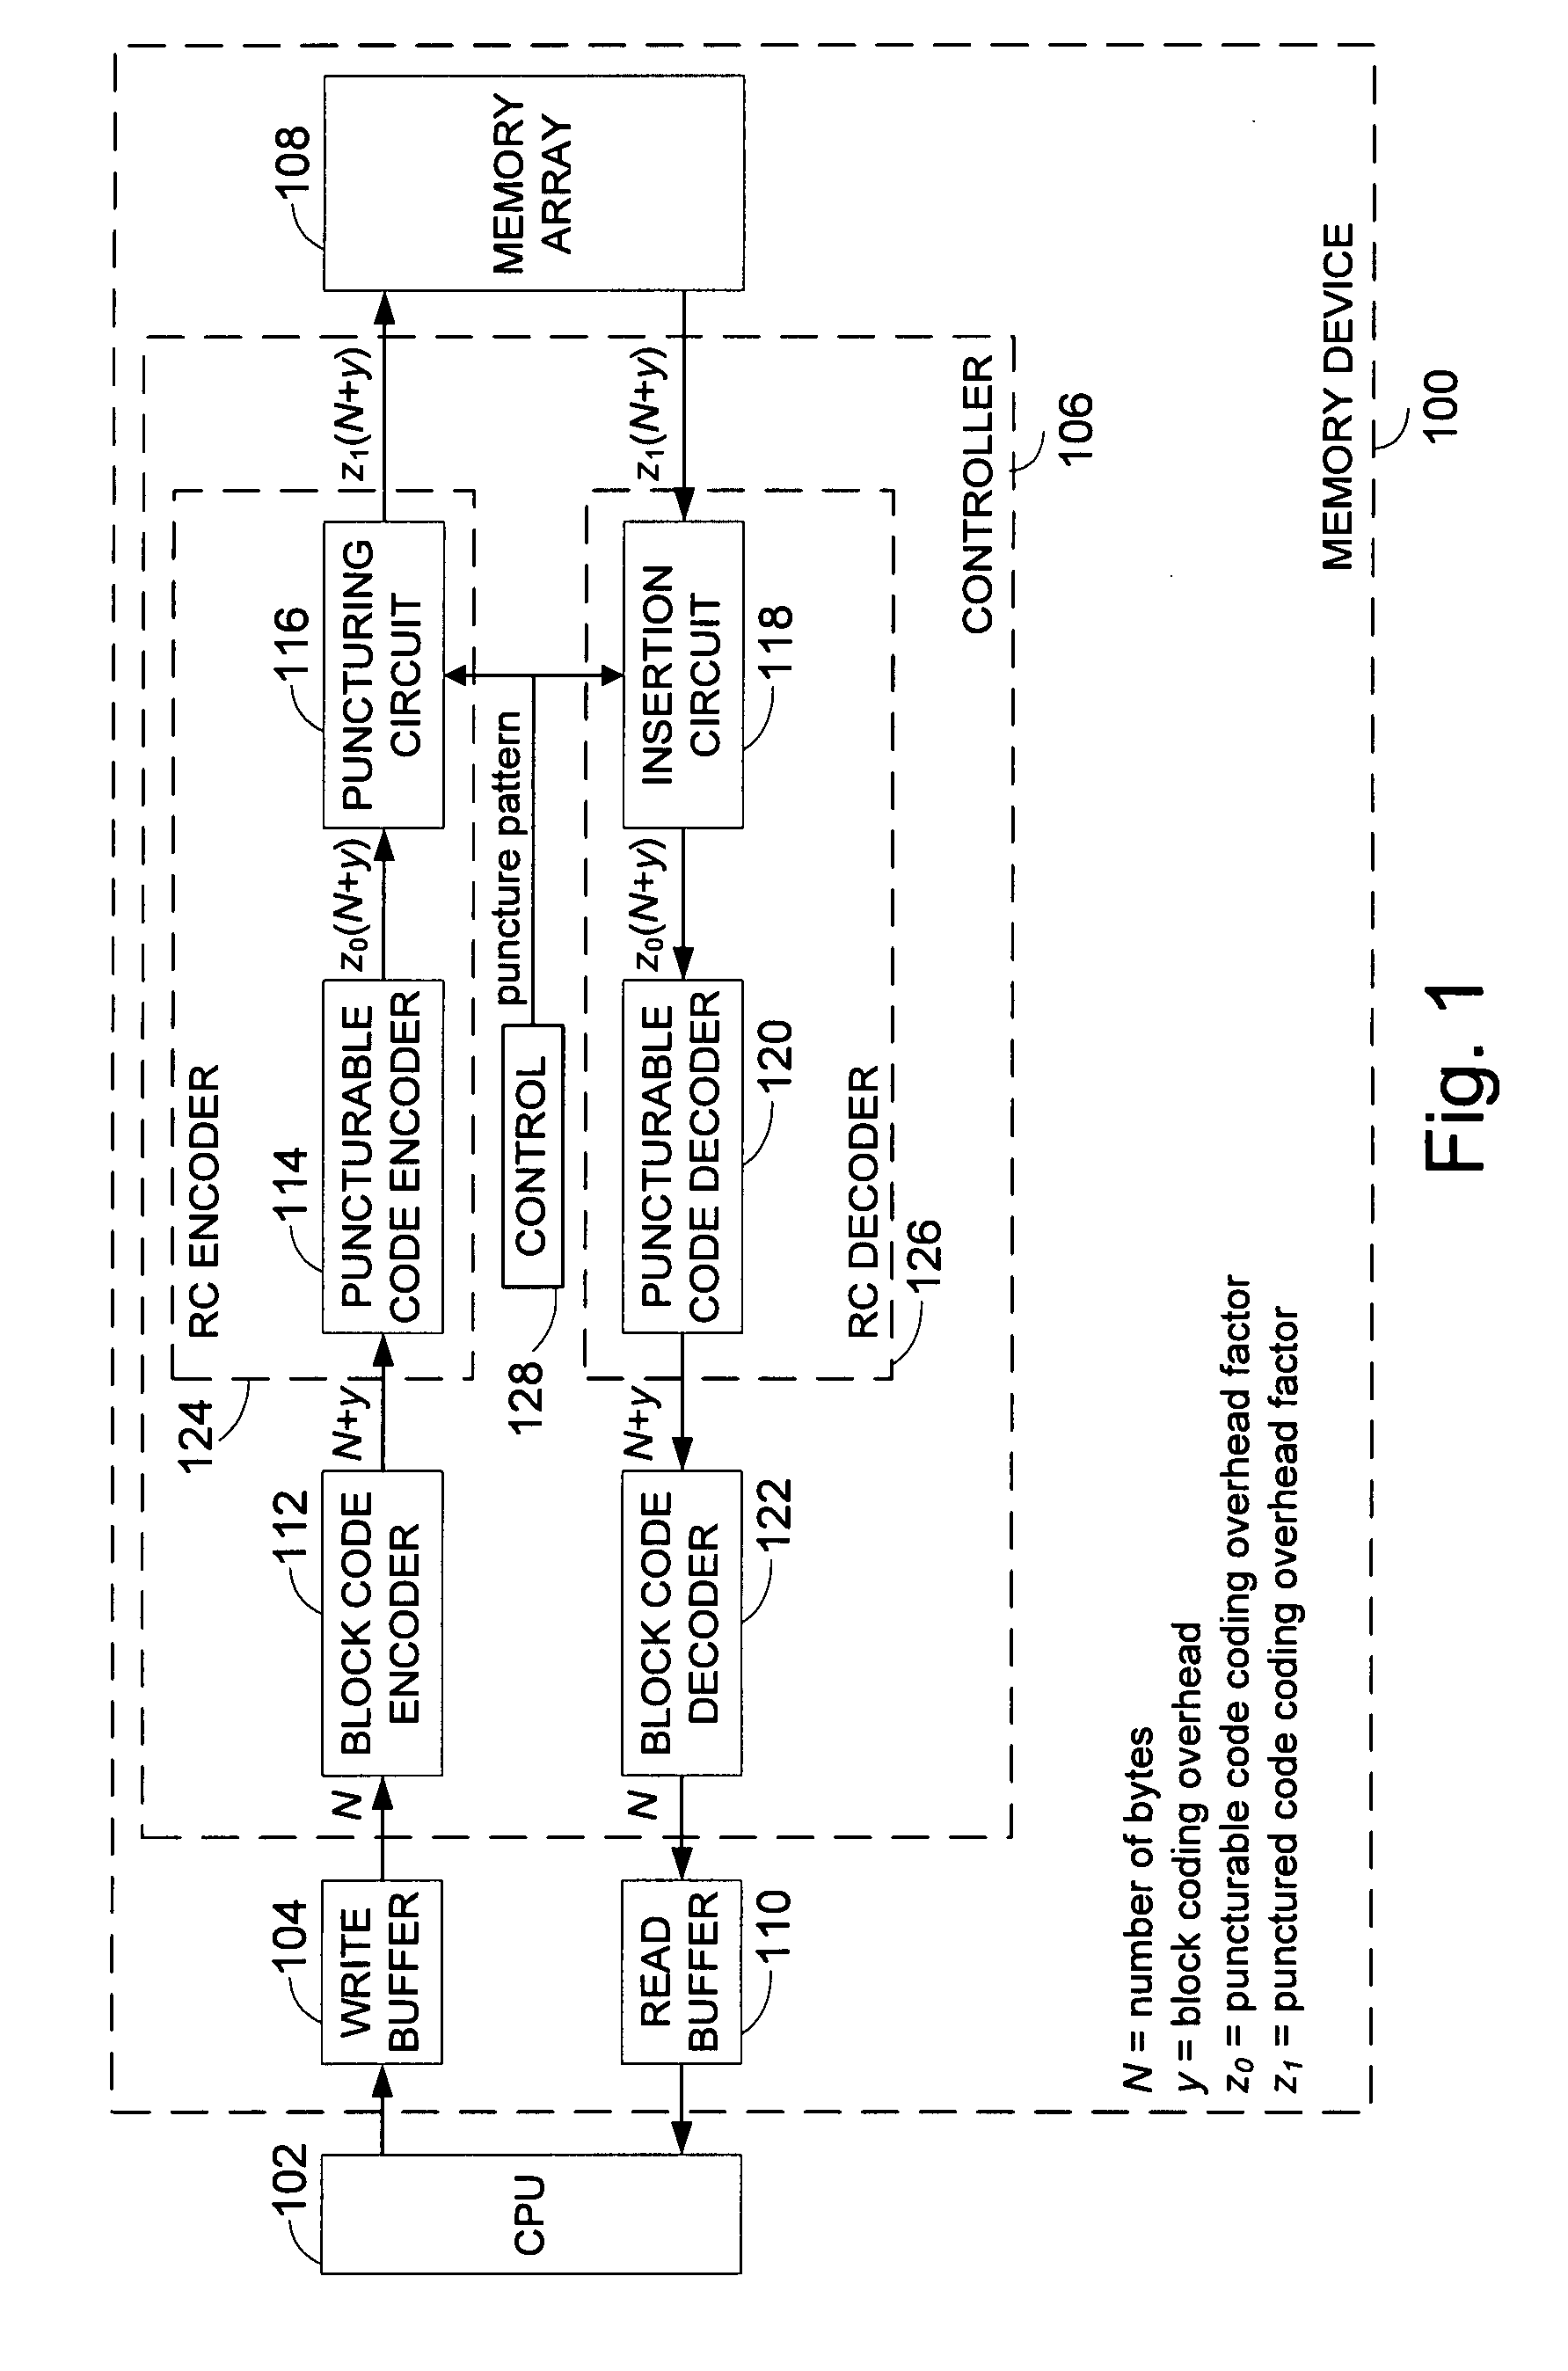 Memory controller supporting rate-compatible punctured codes